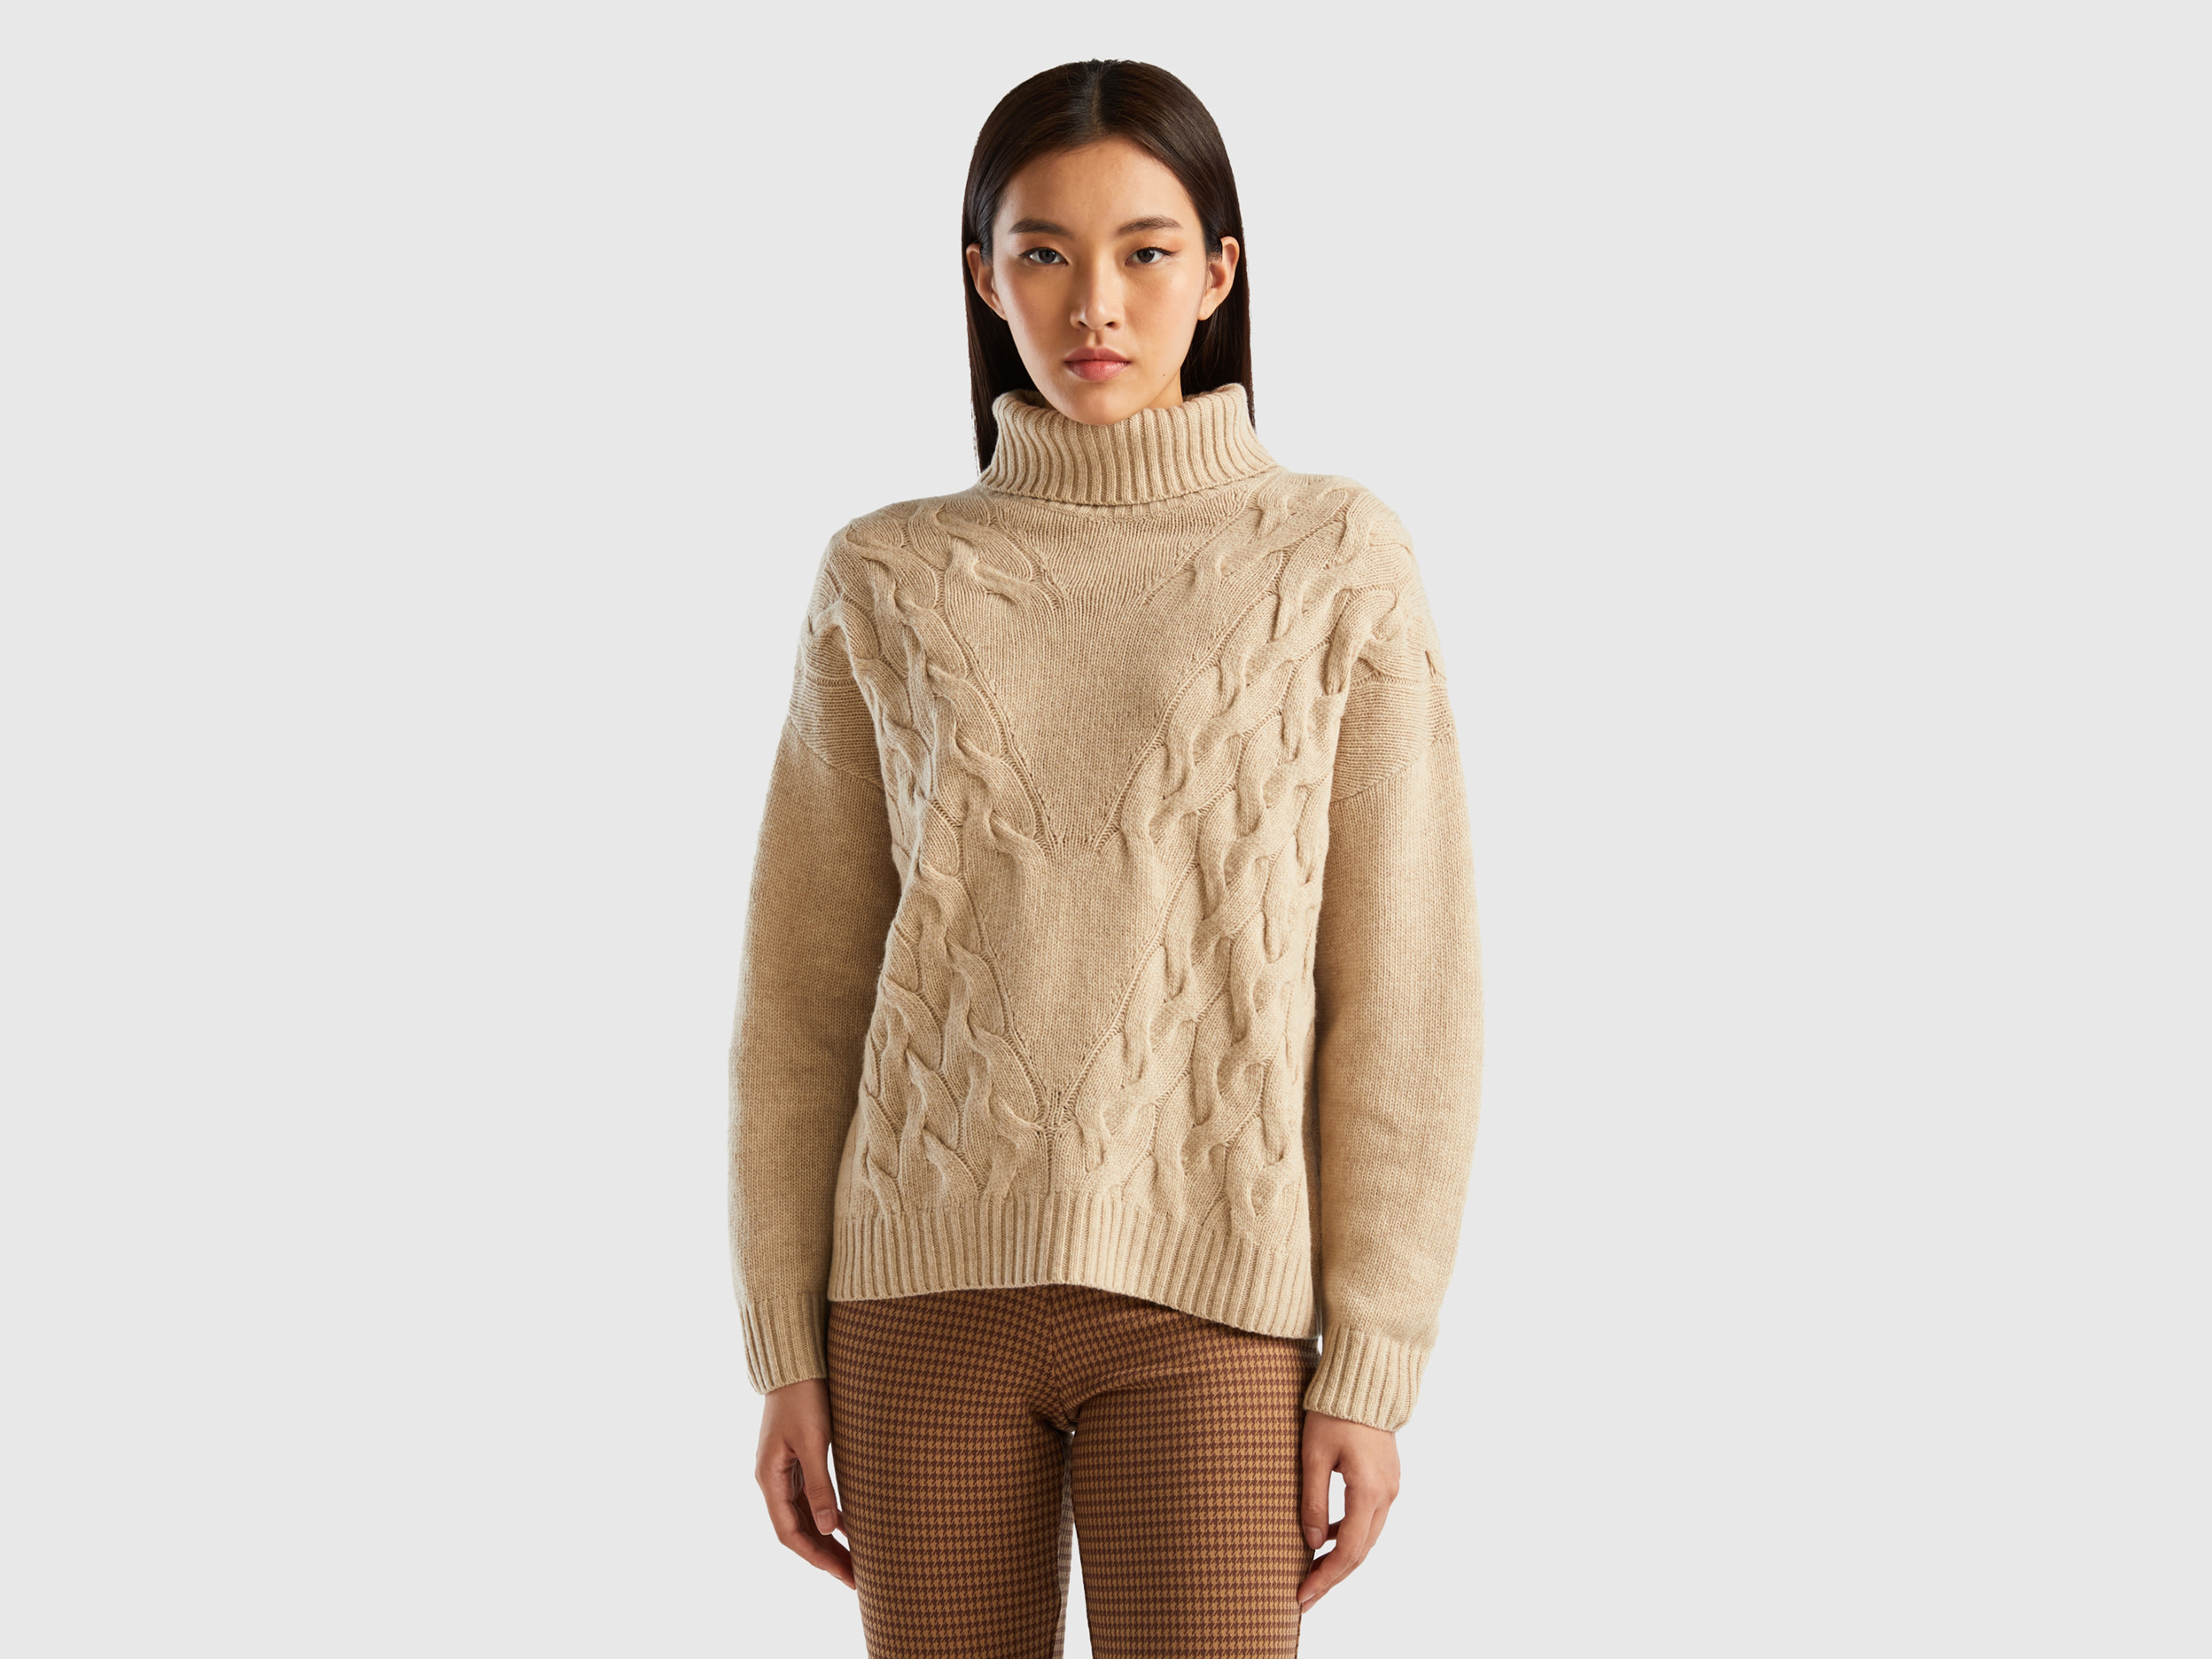 Benetton, Turtleneck With Cables, size M, Beige, Women